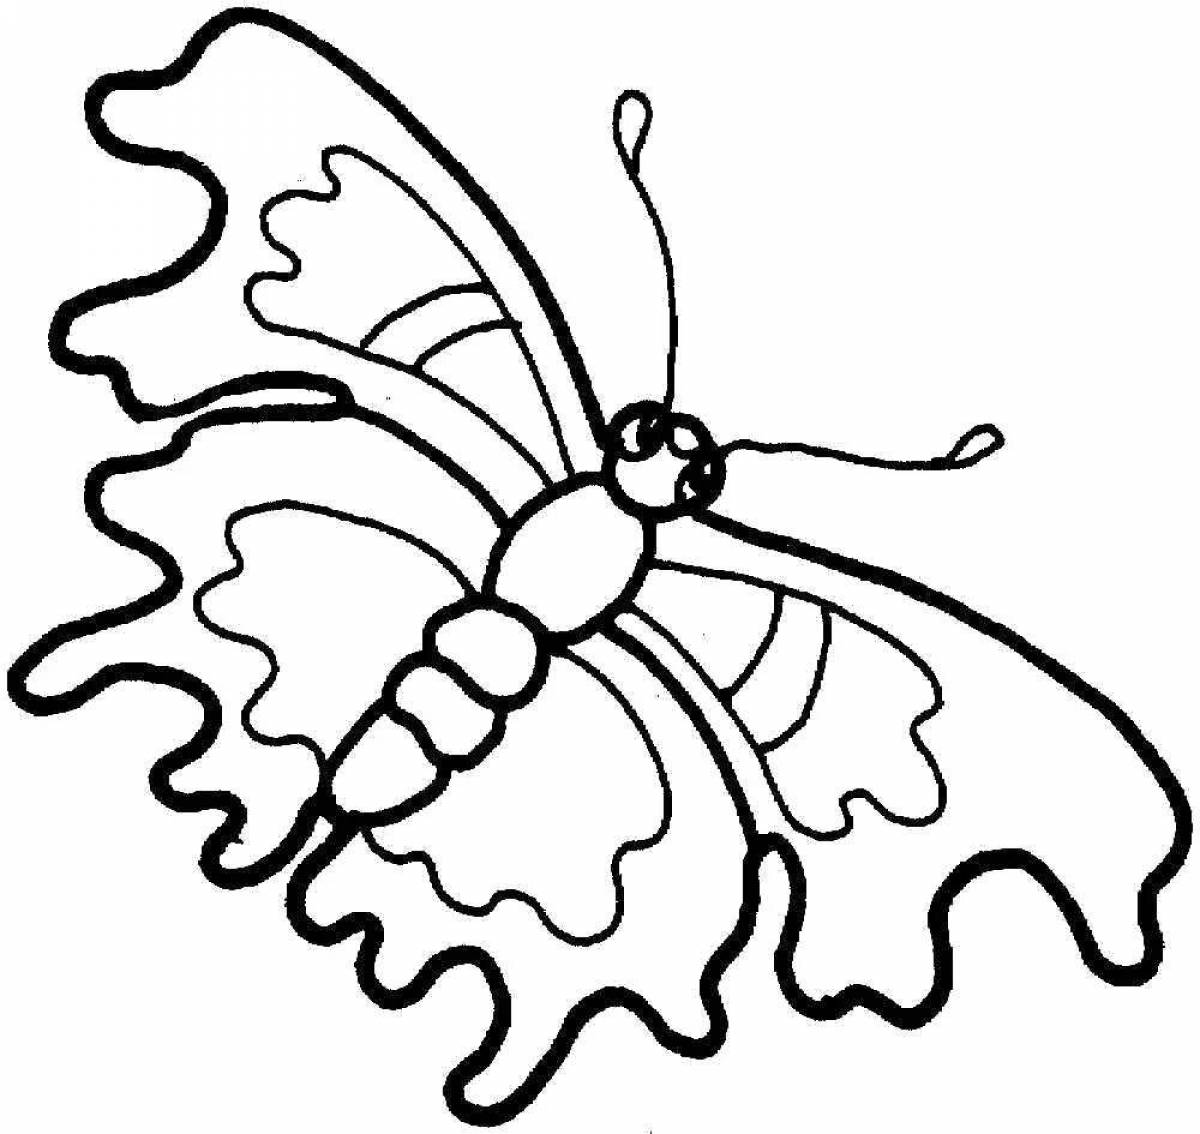 A fun insect coloring book for 6-7 year olds